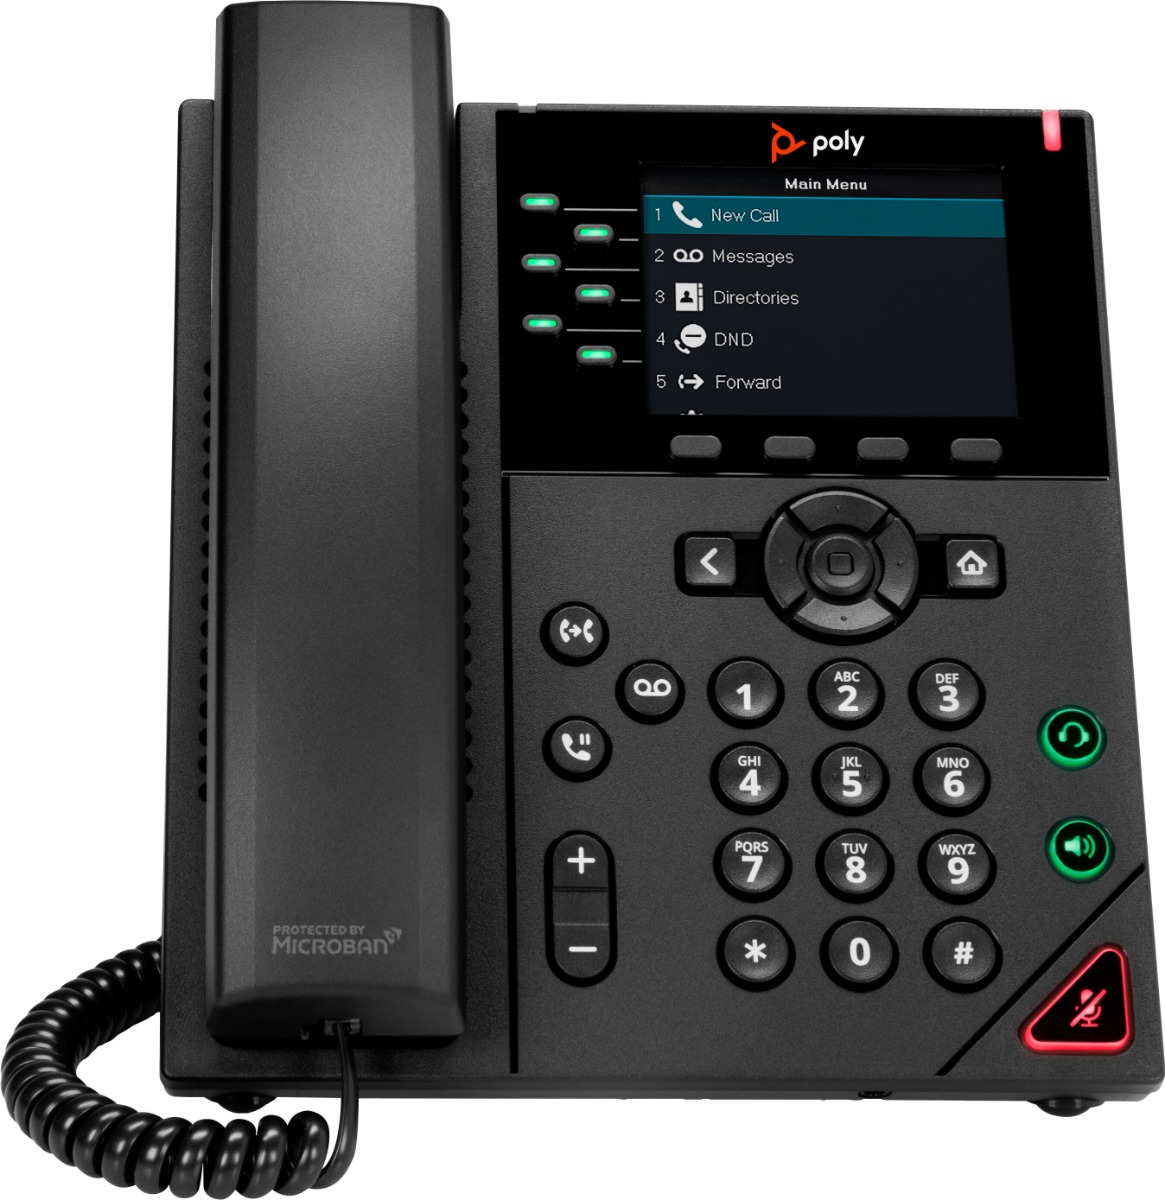 What is the number and location of USB ports on the Polycom VVX 350 6-Line Mid-range Color IP Desktop Phone?